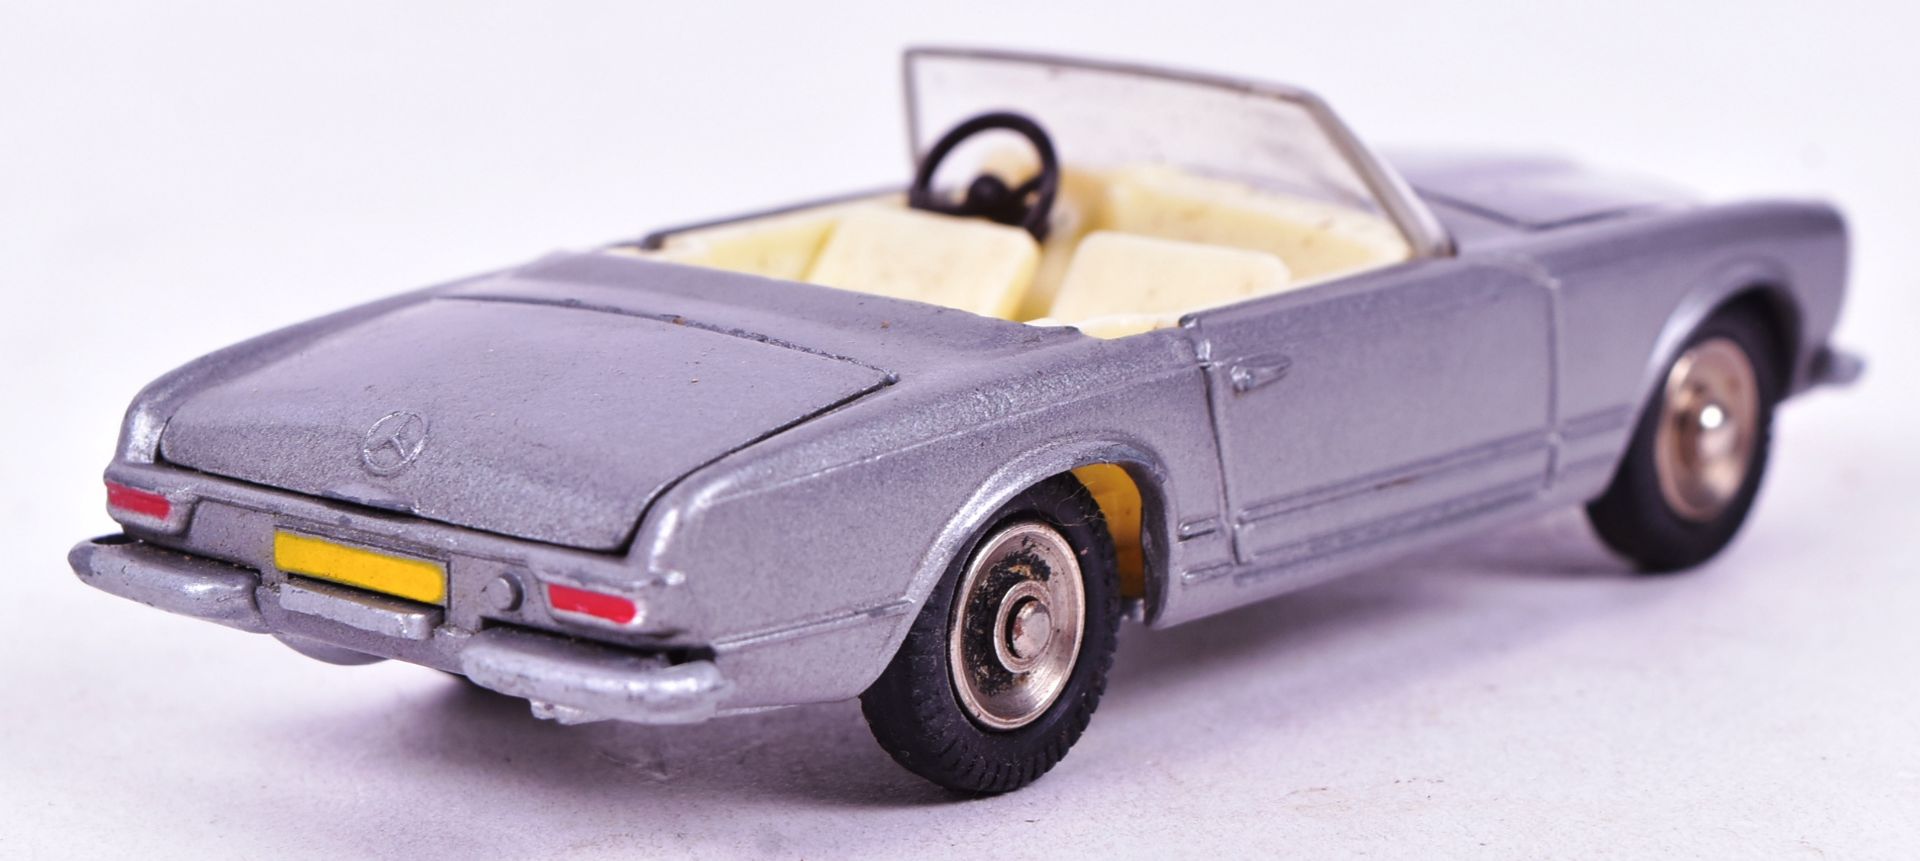 DIECAST - FRENCH DINKY TOYS - MERCEDES BENZ 230 SL - Image 4 of 5